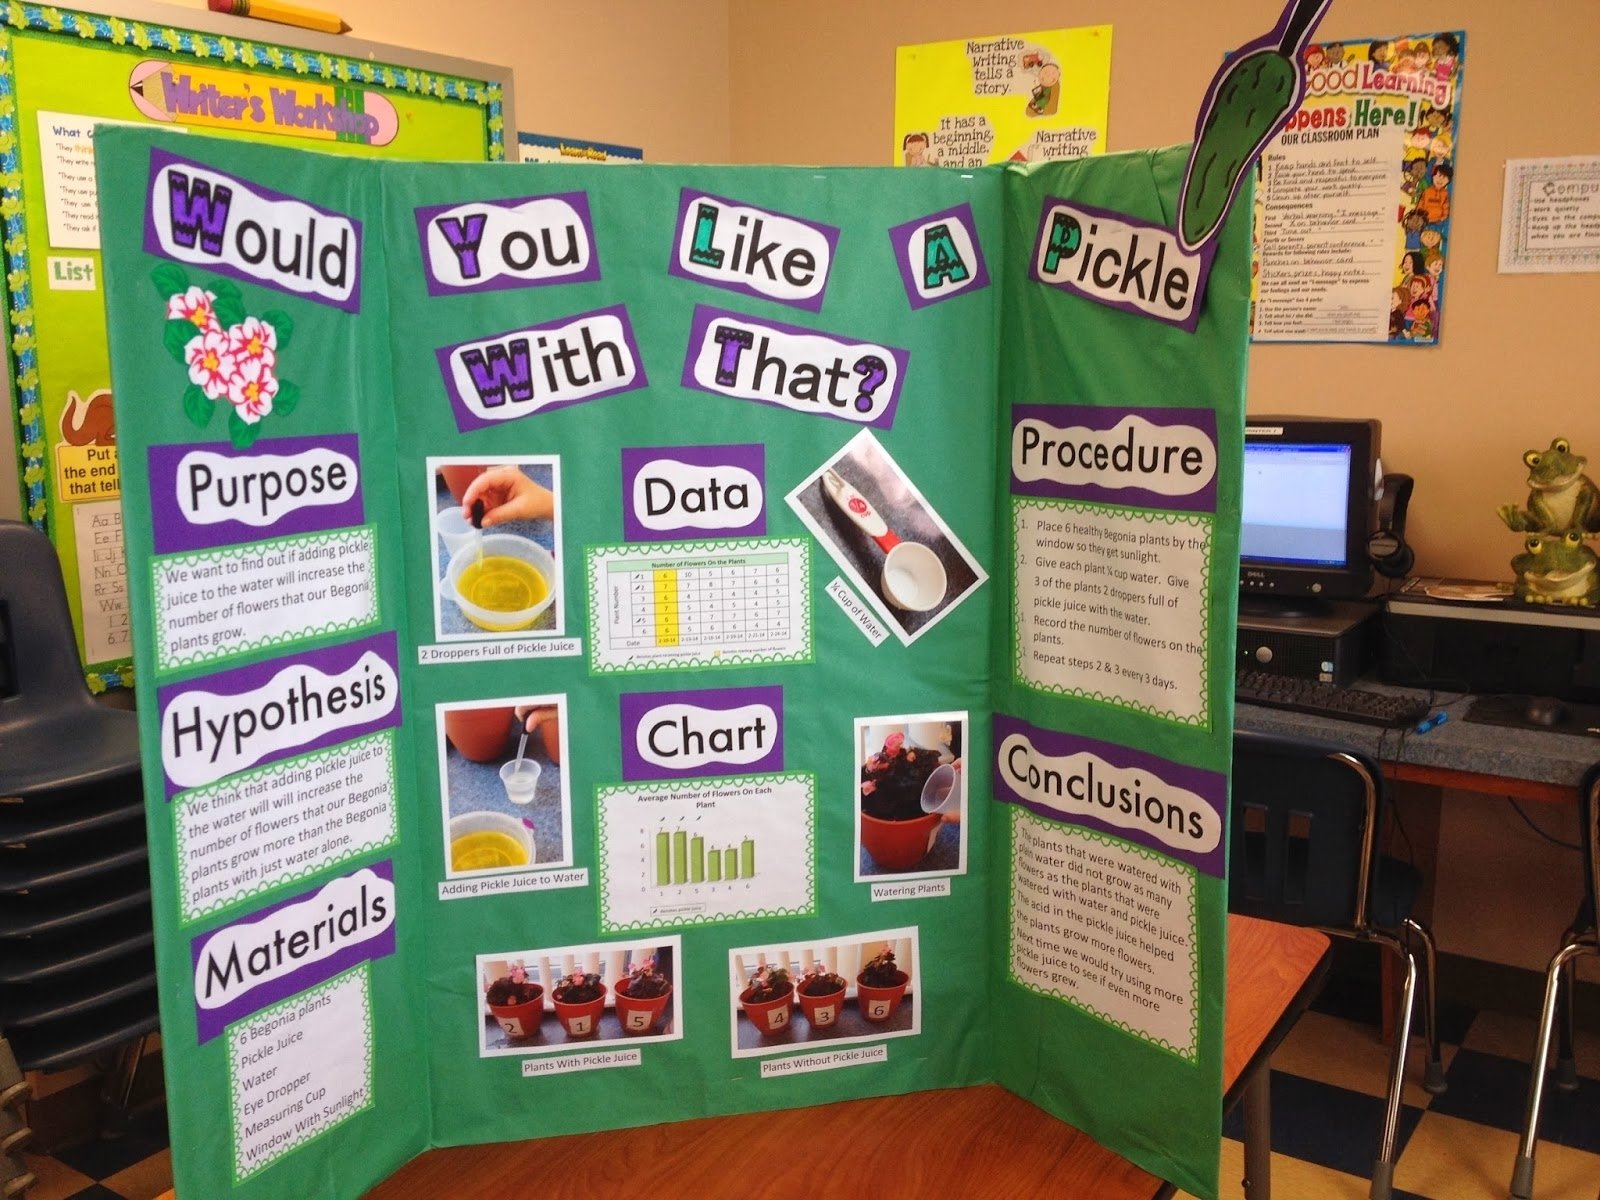 Science Fair Project Ideas For 5Th Grade 1St Place - asiandesignleaders